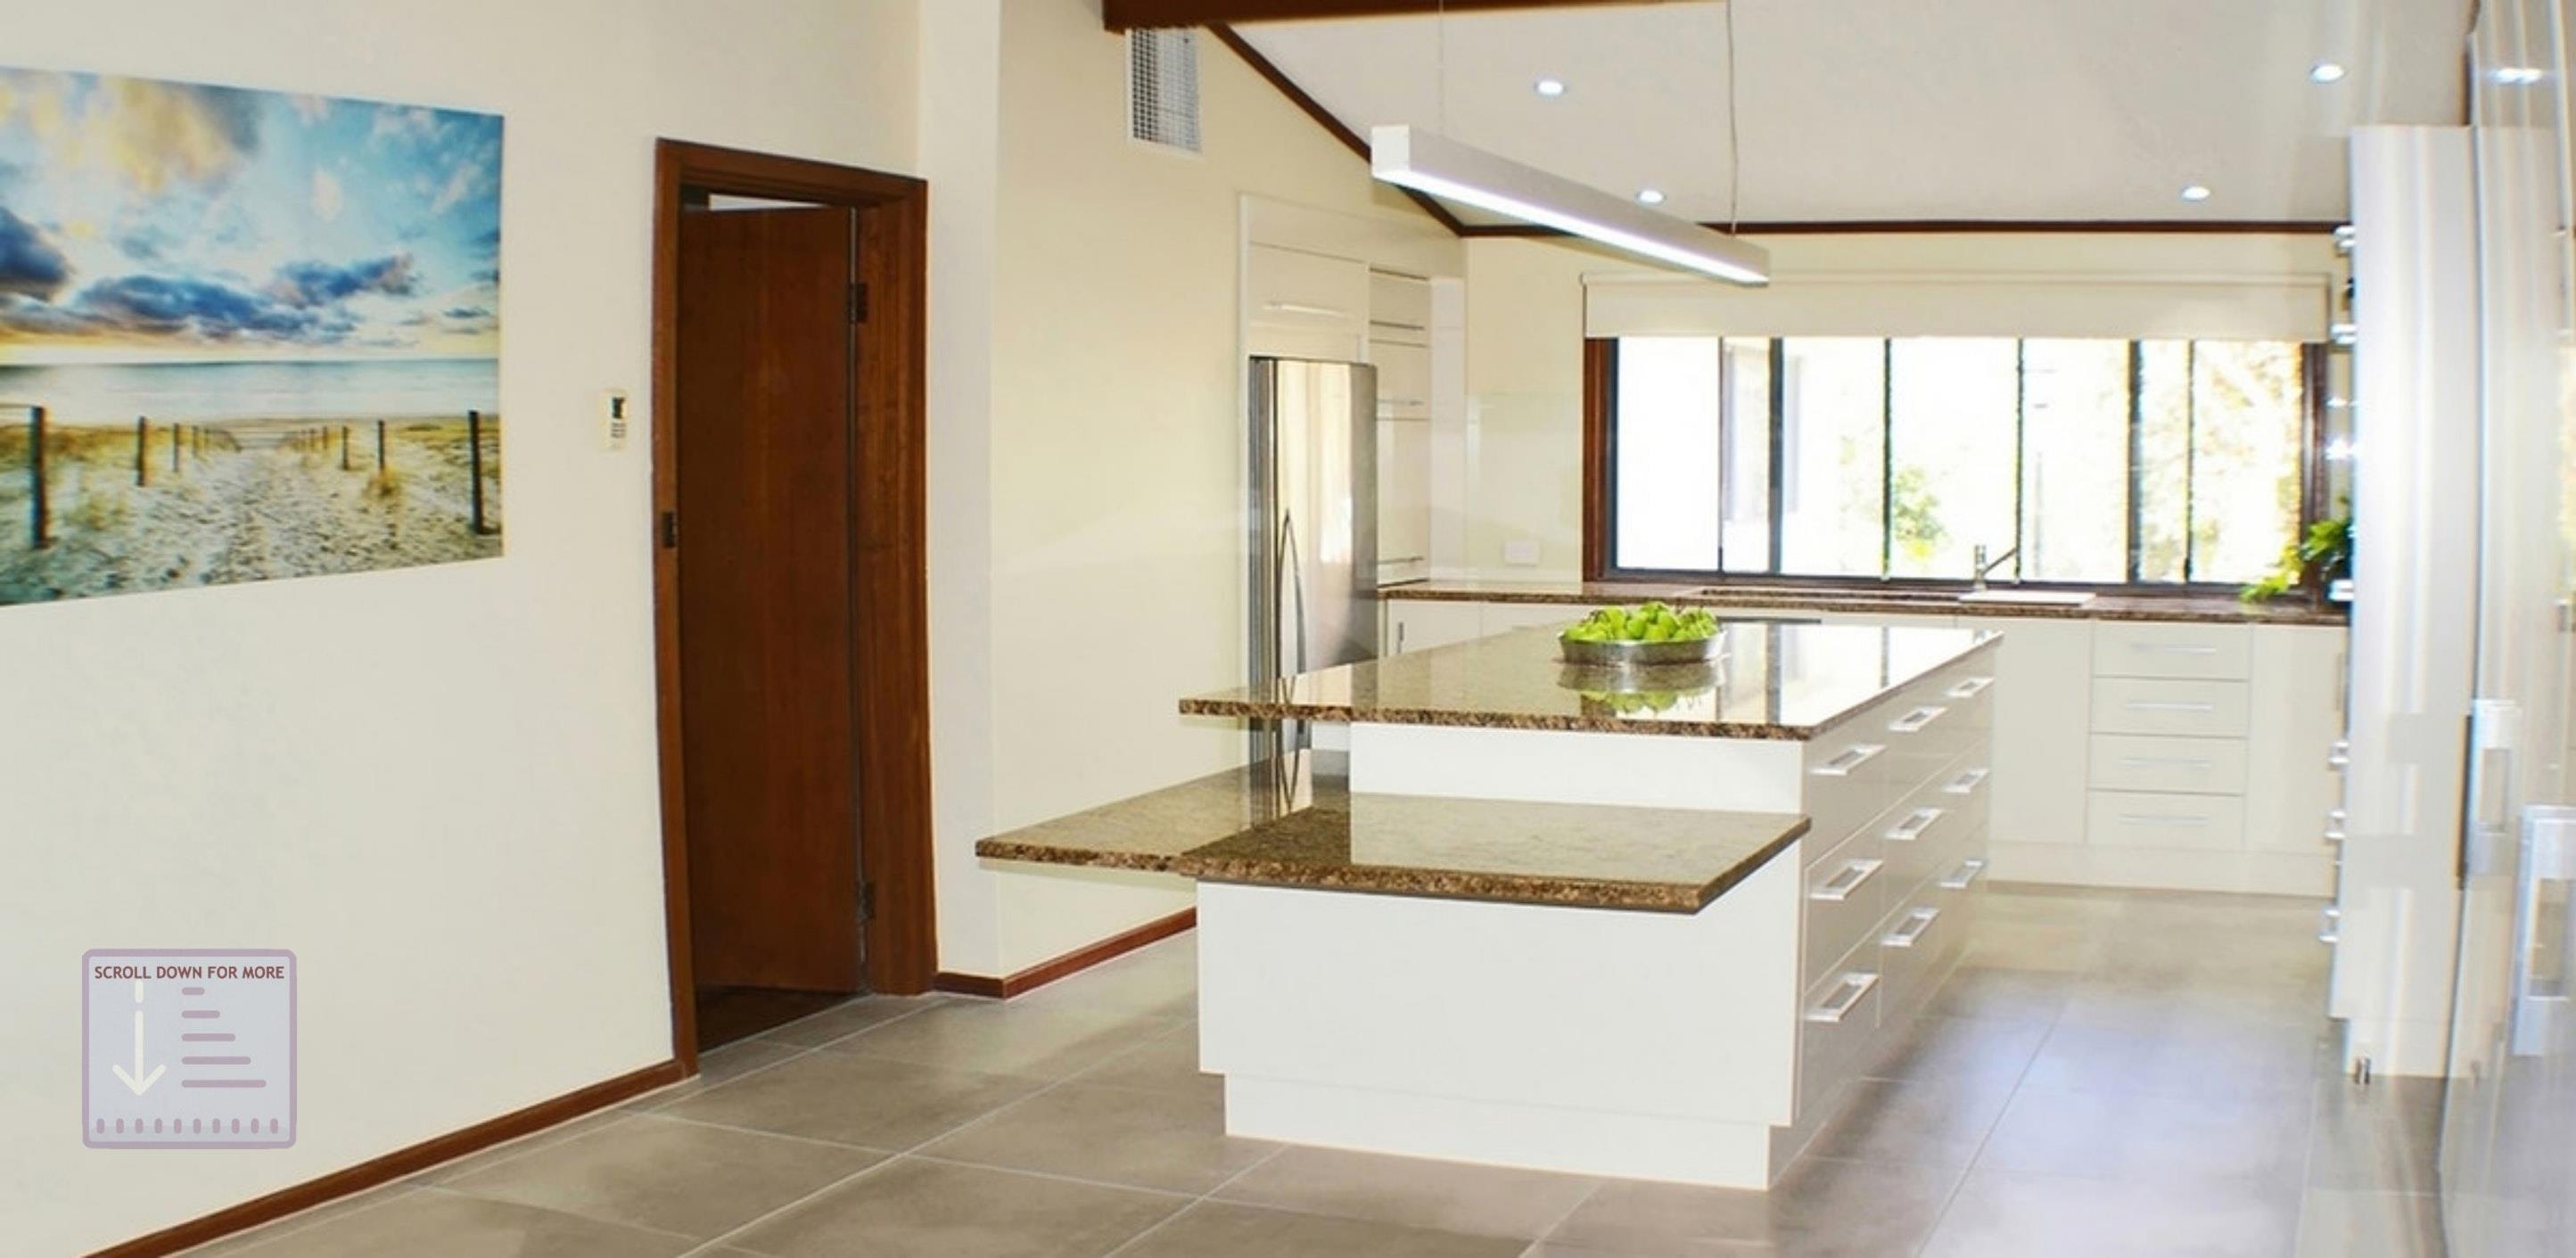 Compass Kitchens, Specializing in Quality Custom Made Kitchen Renovations all over Adelaide.